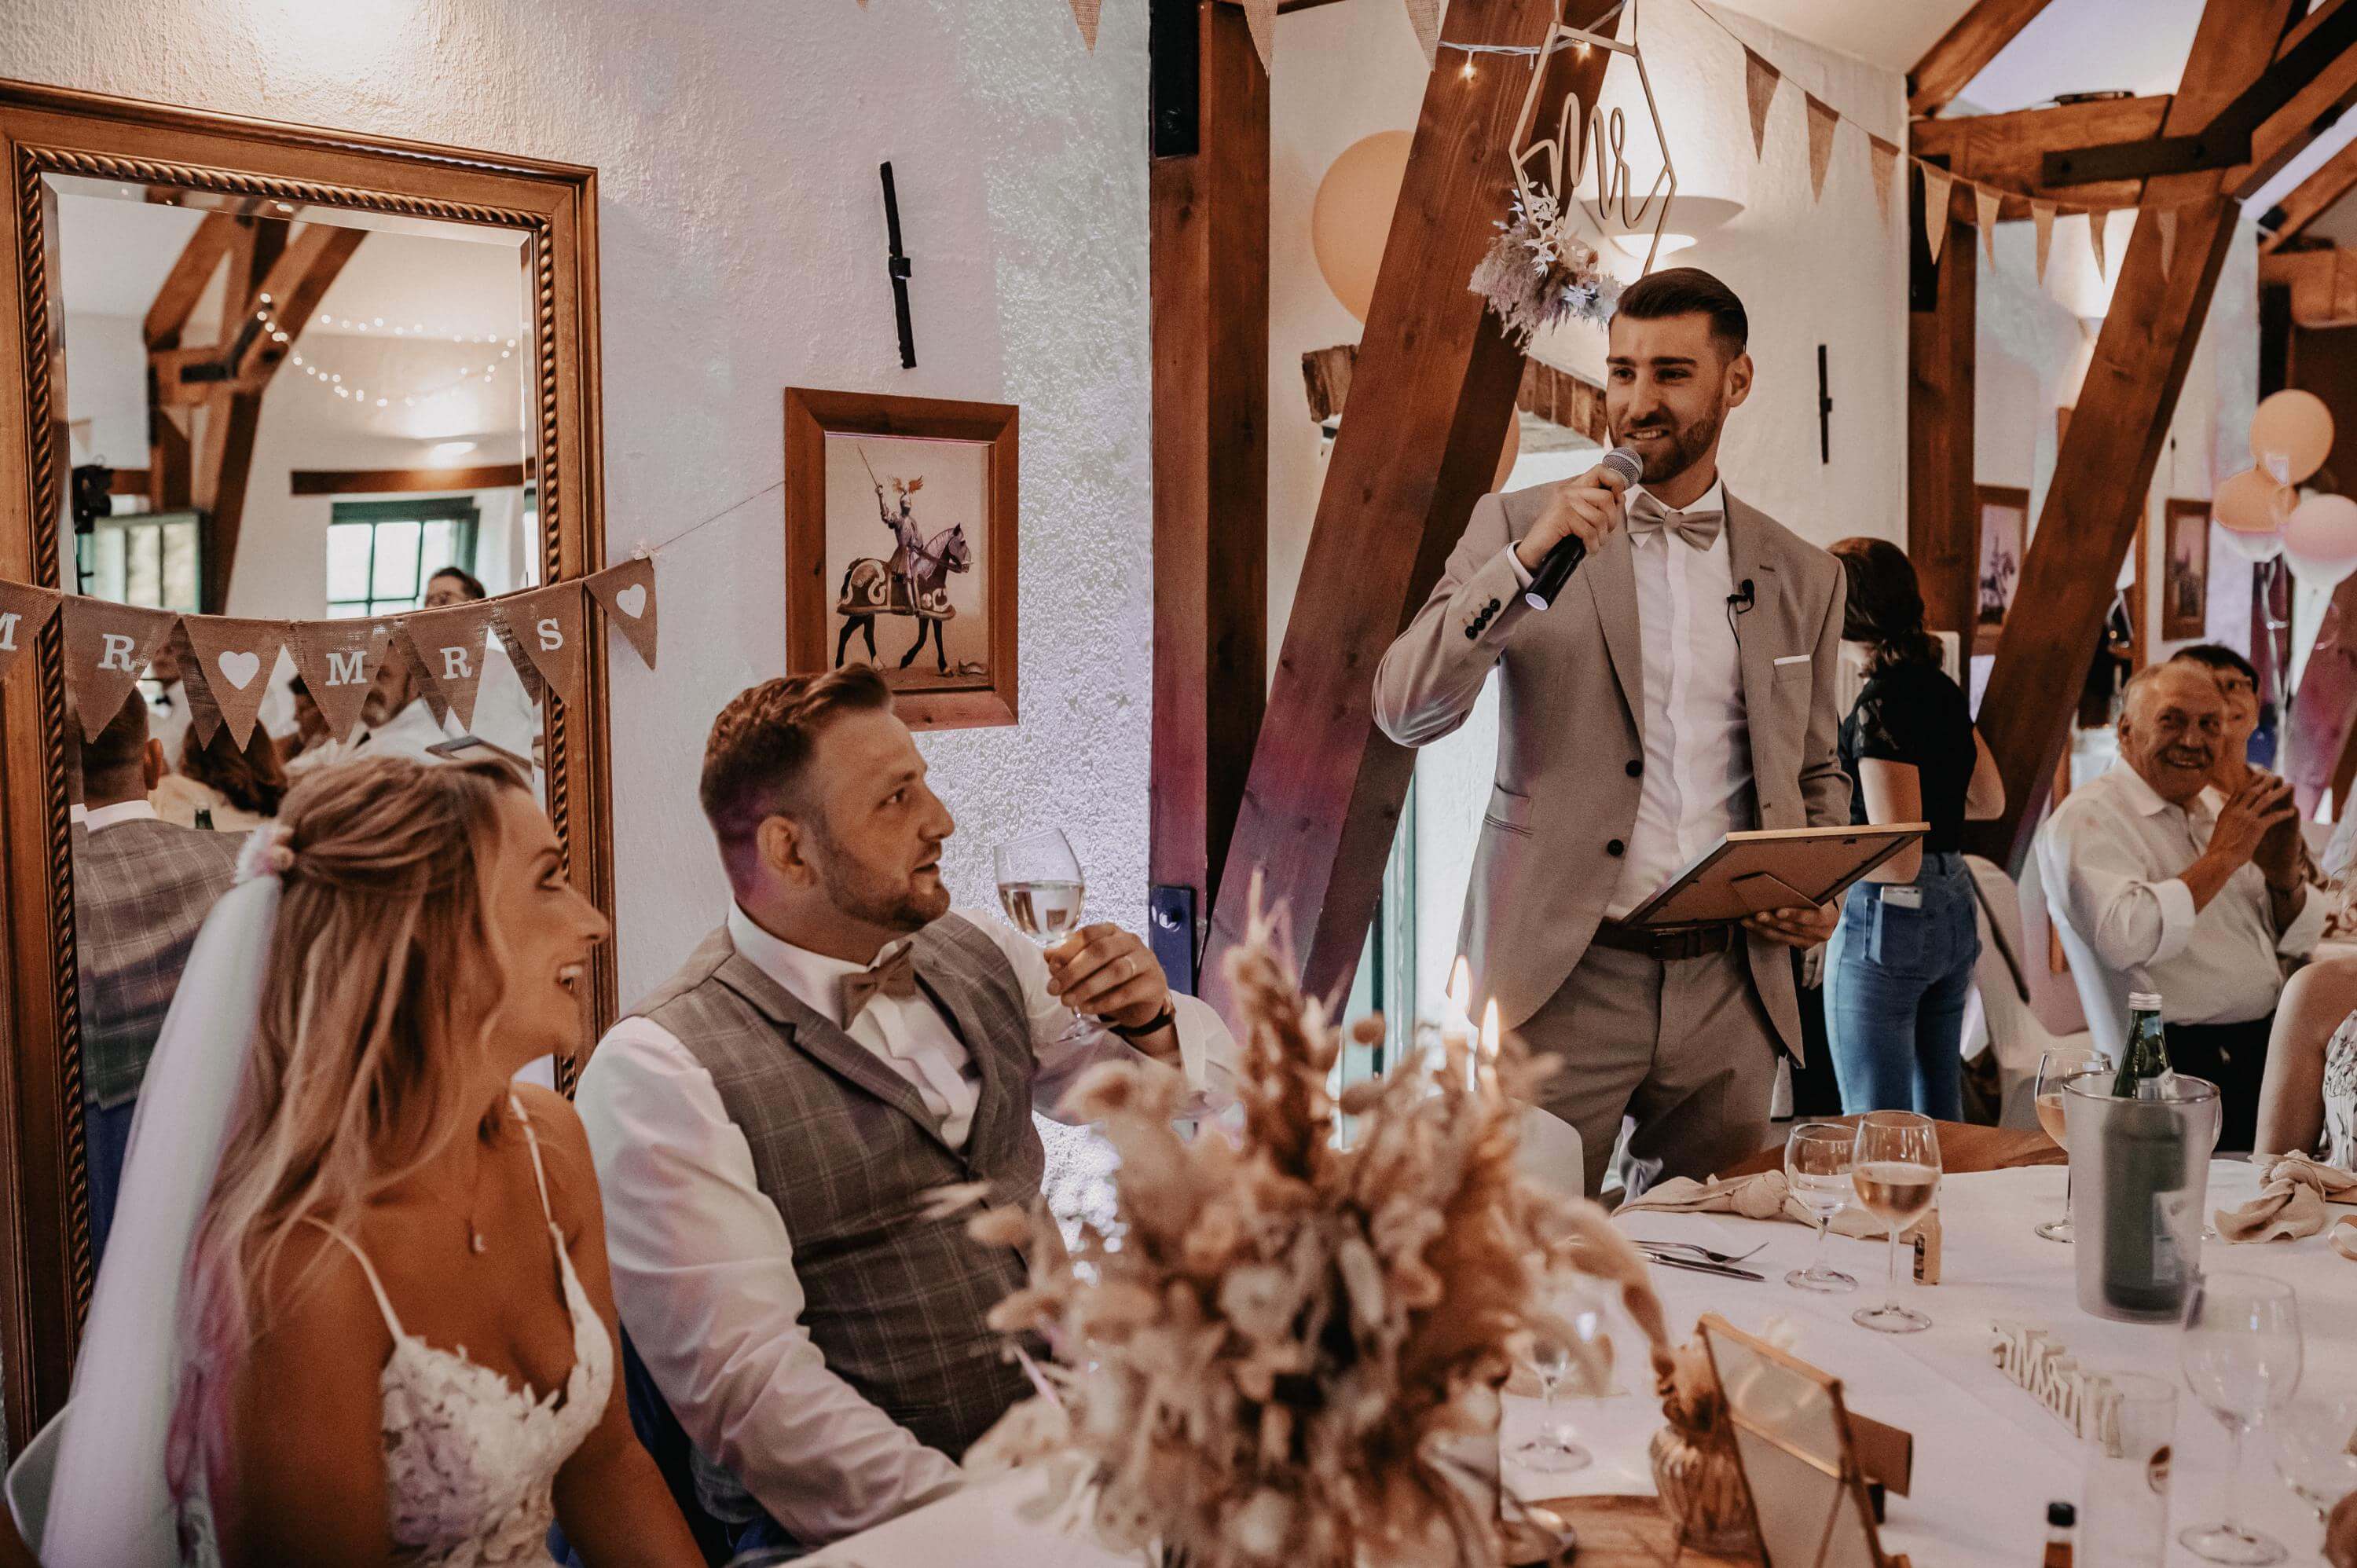 At a wedding reception, a best man stands at the table of the groom, who is seated next to him, holding a picture in the frame. He speaks a touching speech with the microphone that brings tears to the eyes of the bridal couple.